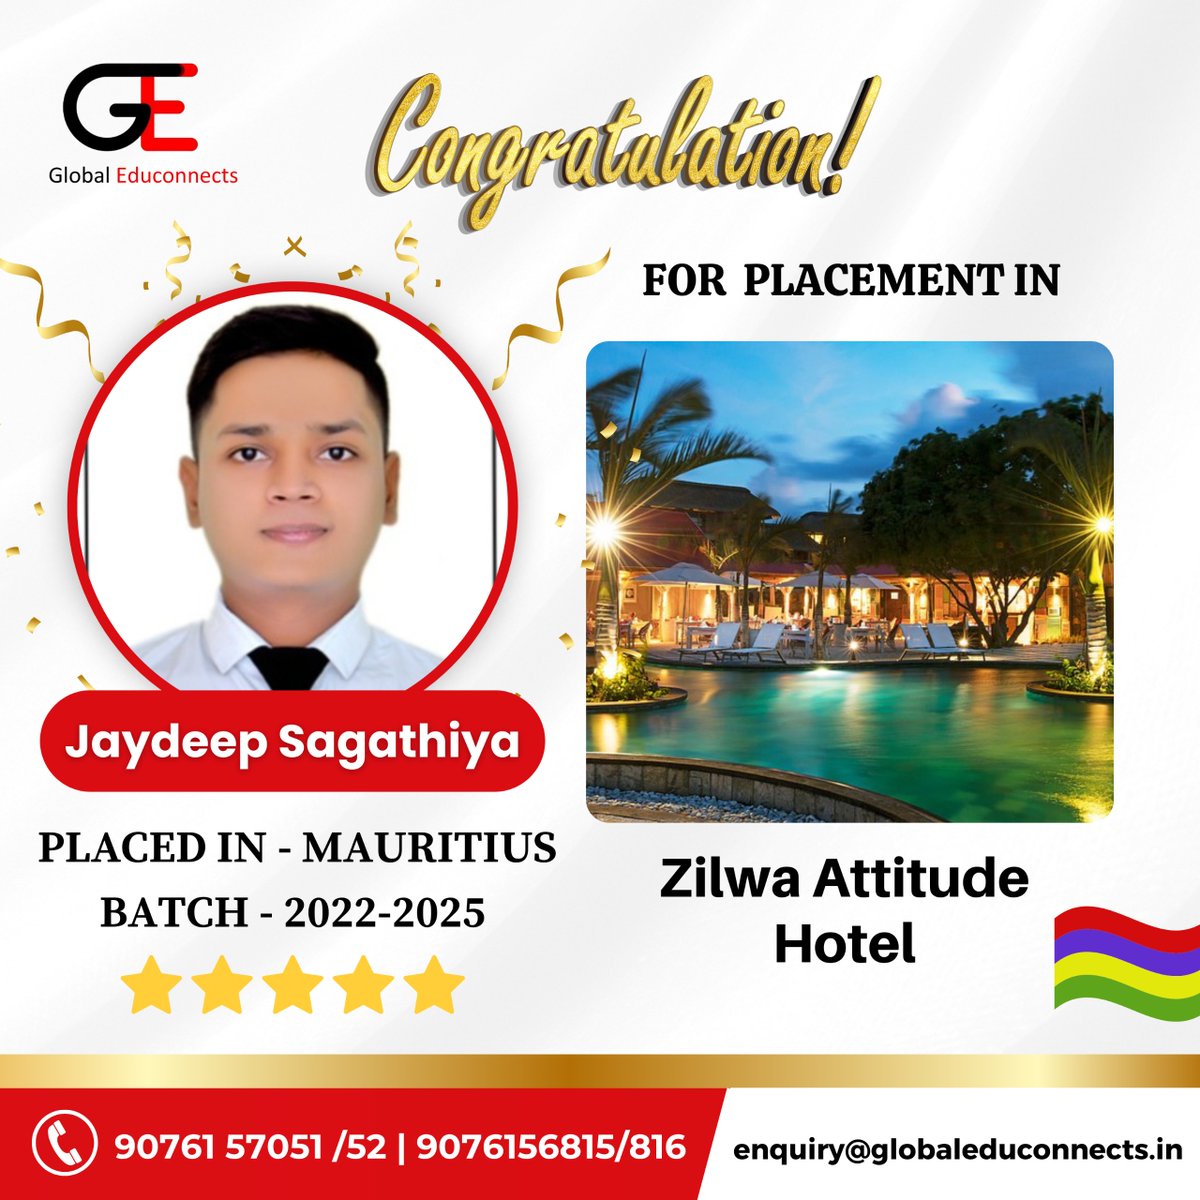 Congratulations!!! @_jaydeep5151, on successfully getting placed in Mauritius. 

#placementyear #studyabroad #abroadstudy #mauritius #studyabroadlife #globaleduconencts #hospitalitymanagement #studyinmauritius #studyinmauritius2024 #mauritius #placememt2024